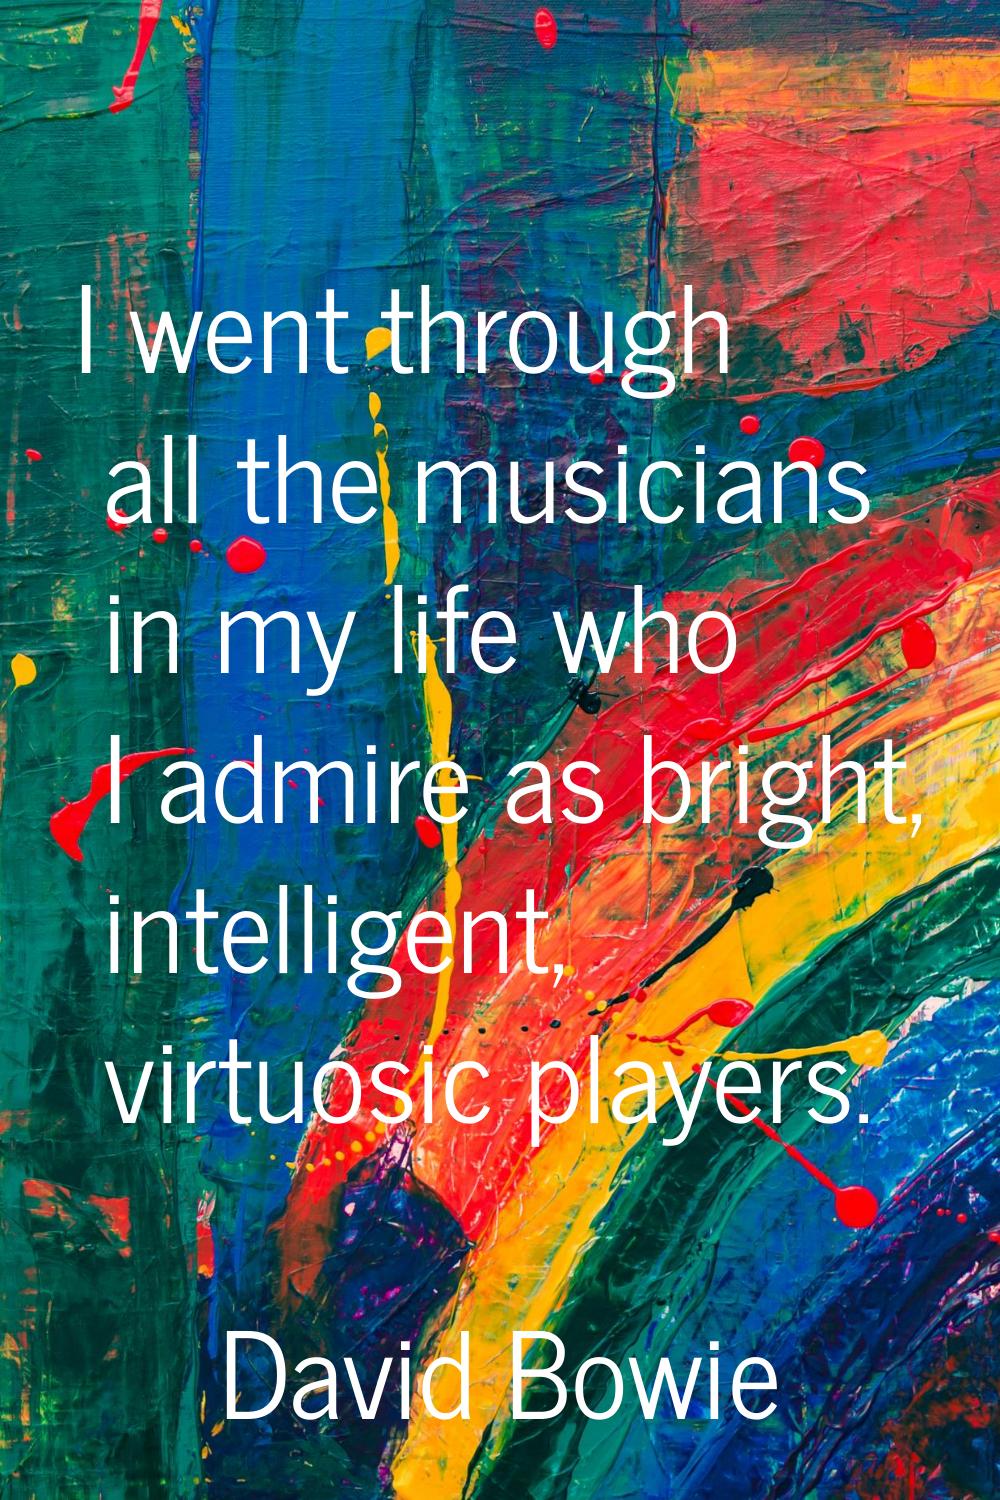 I went through all the musicians in my life who I admire as bright, intelligent, virtuosic players.